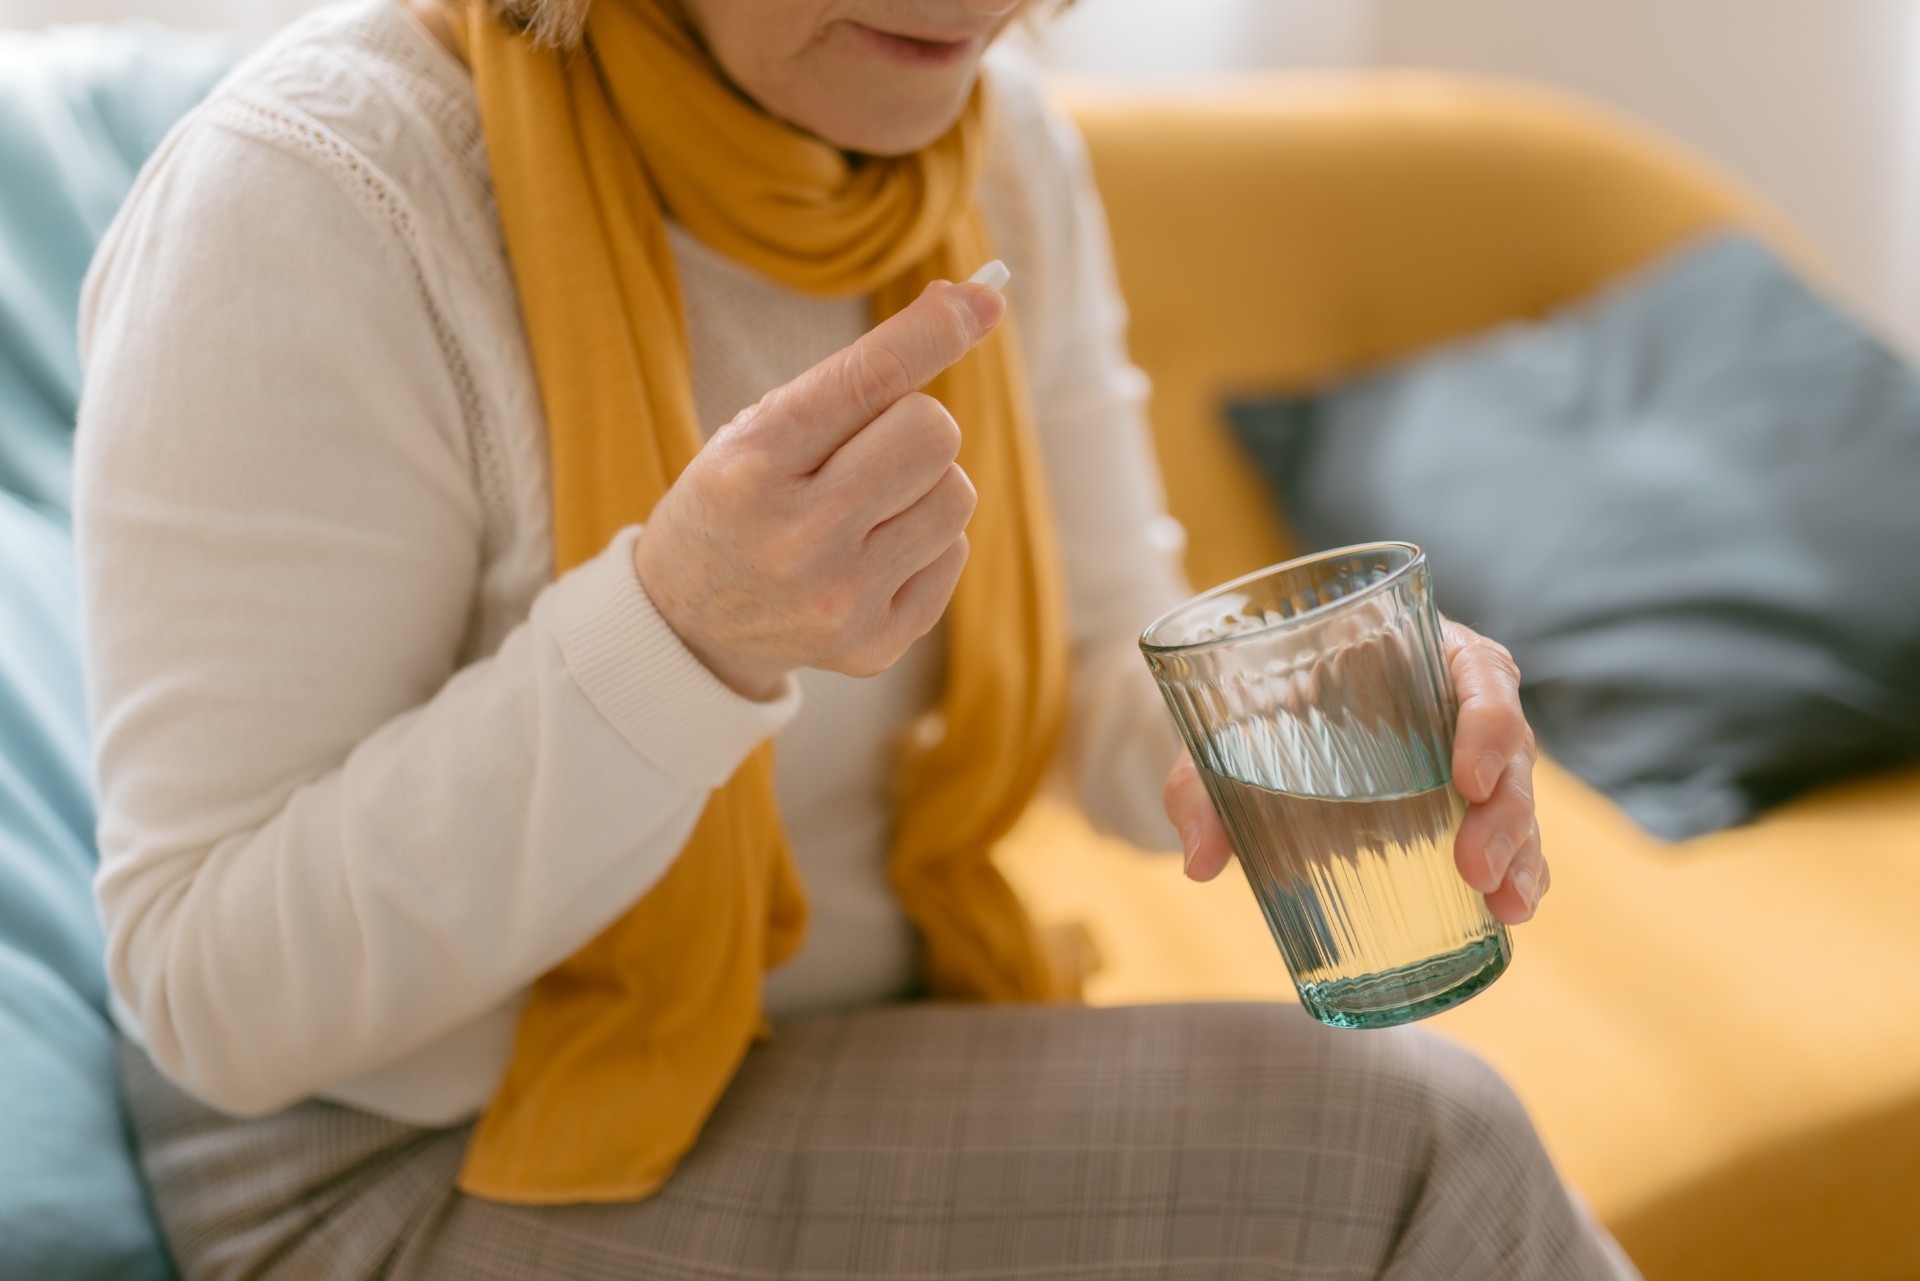 Close up view of mature woman taking a pill. She has a pill in one hand and a glass of water in the other.